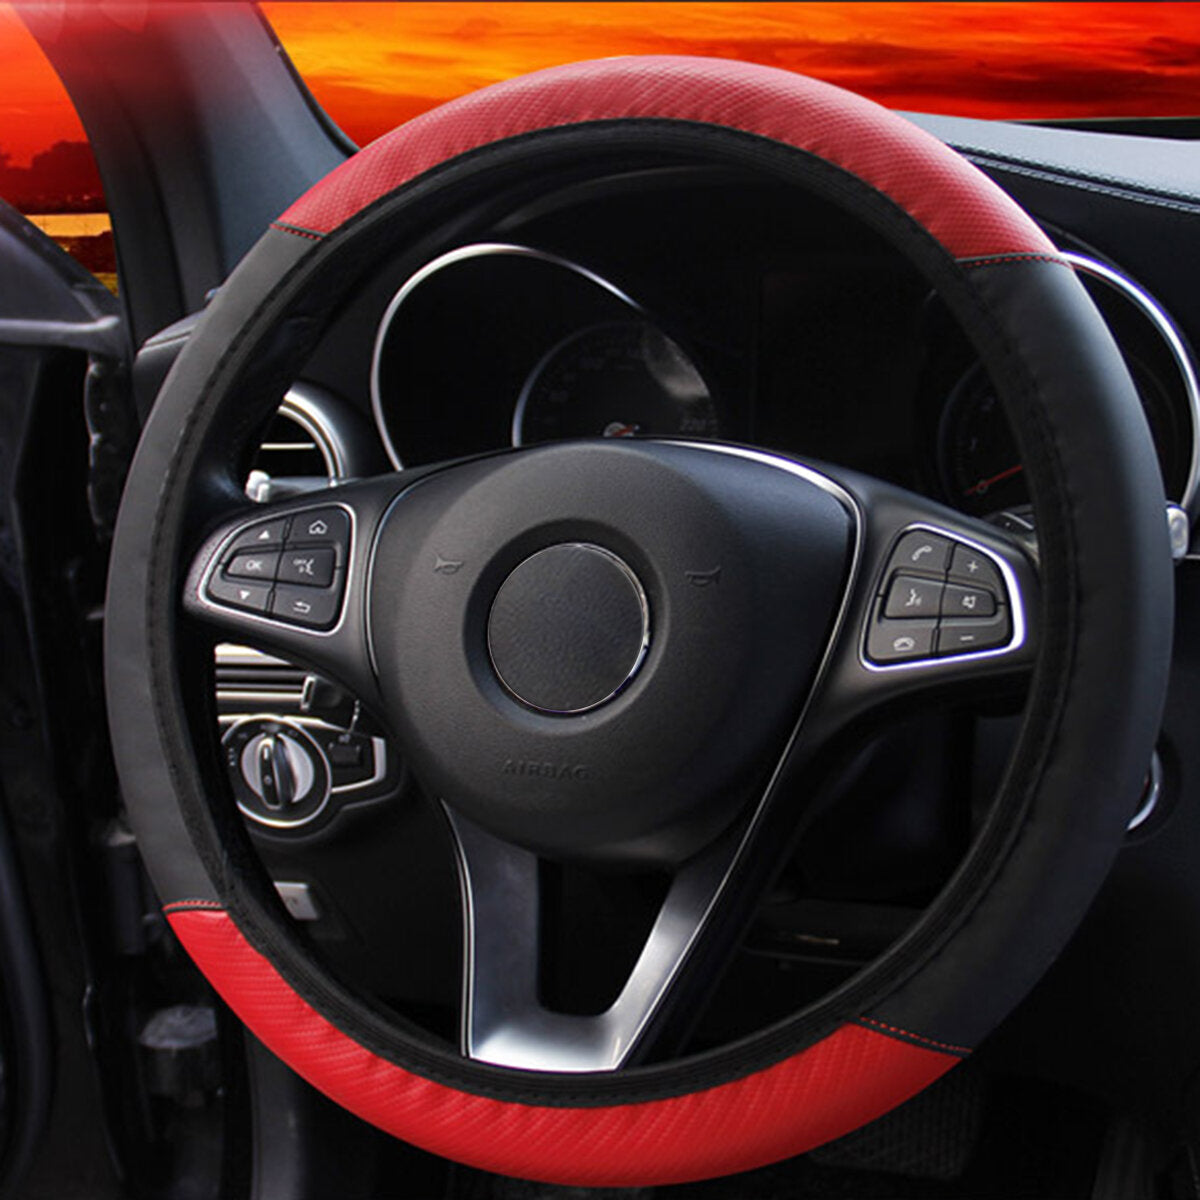 Car Steering Wheel Cover Universal Fiber PU Leather Protector